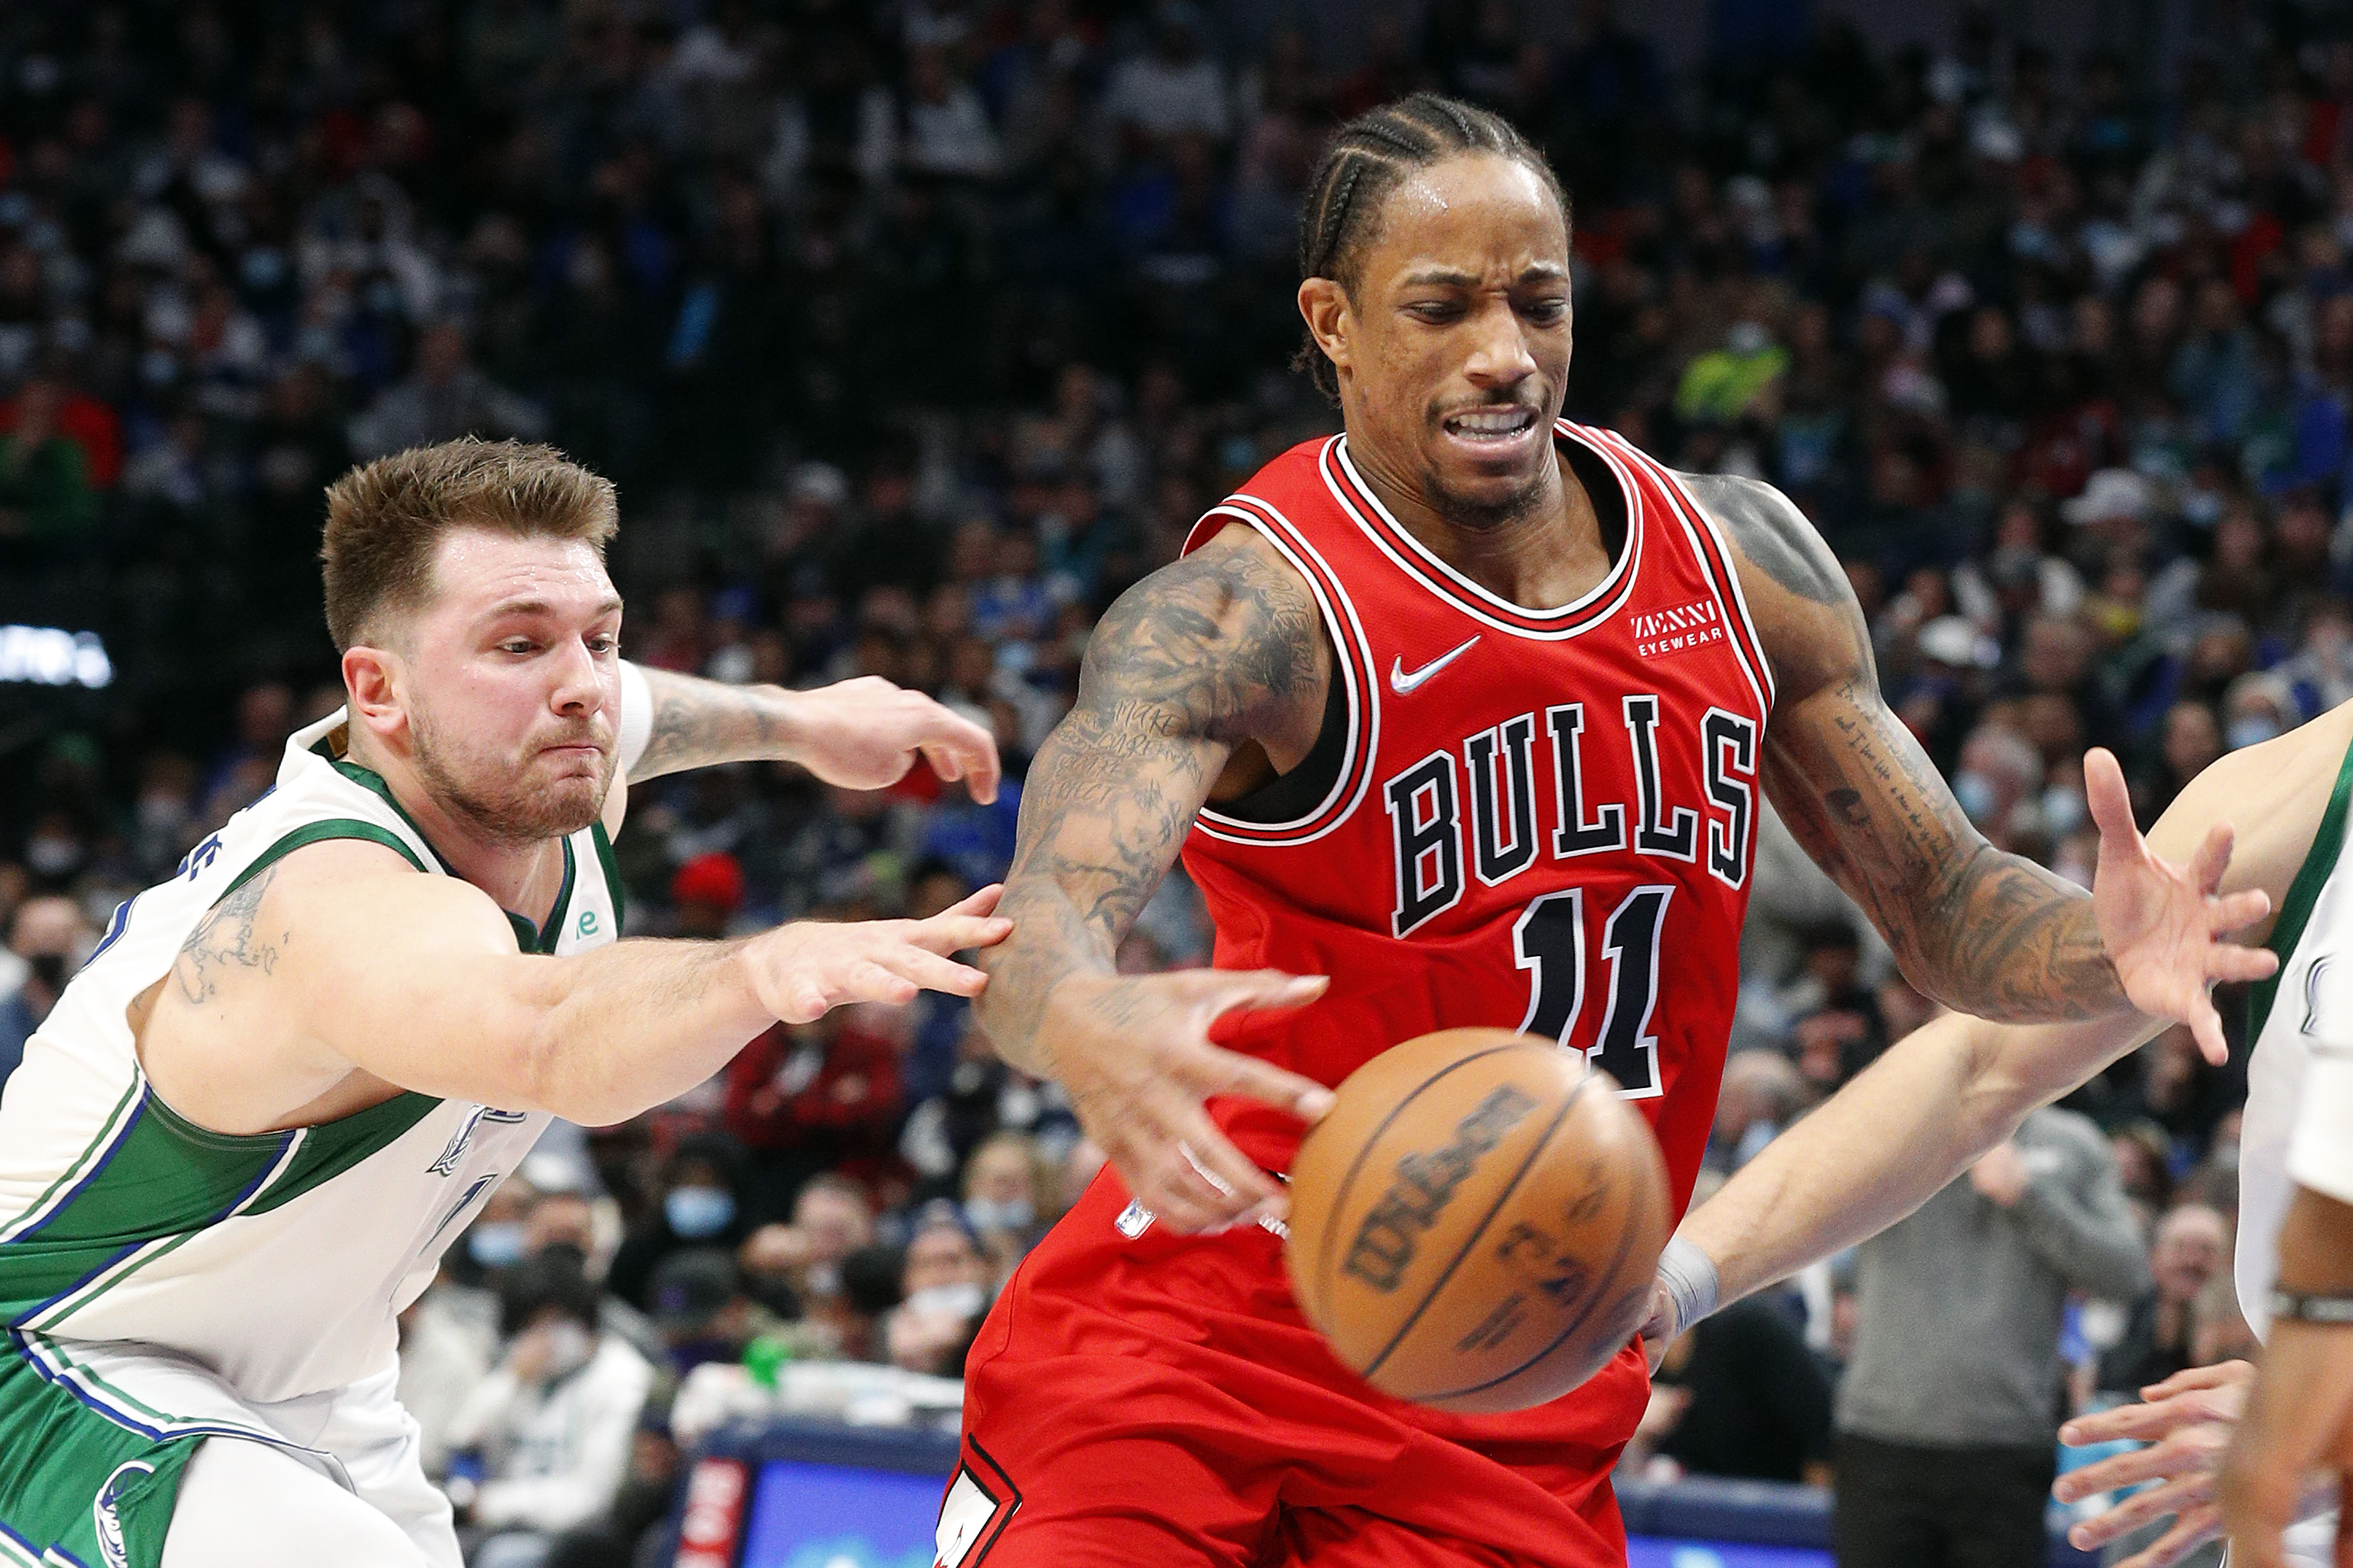 Dallas Mavericks guard Luka Doncic tries to steal the ball from Chicago Bulls star DeMar DeRozan during an NBA game in January 2022